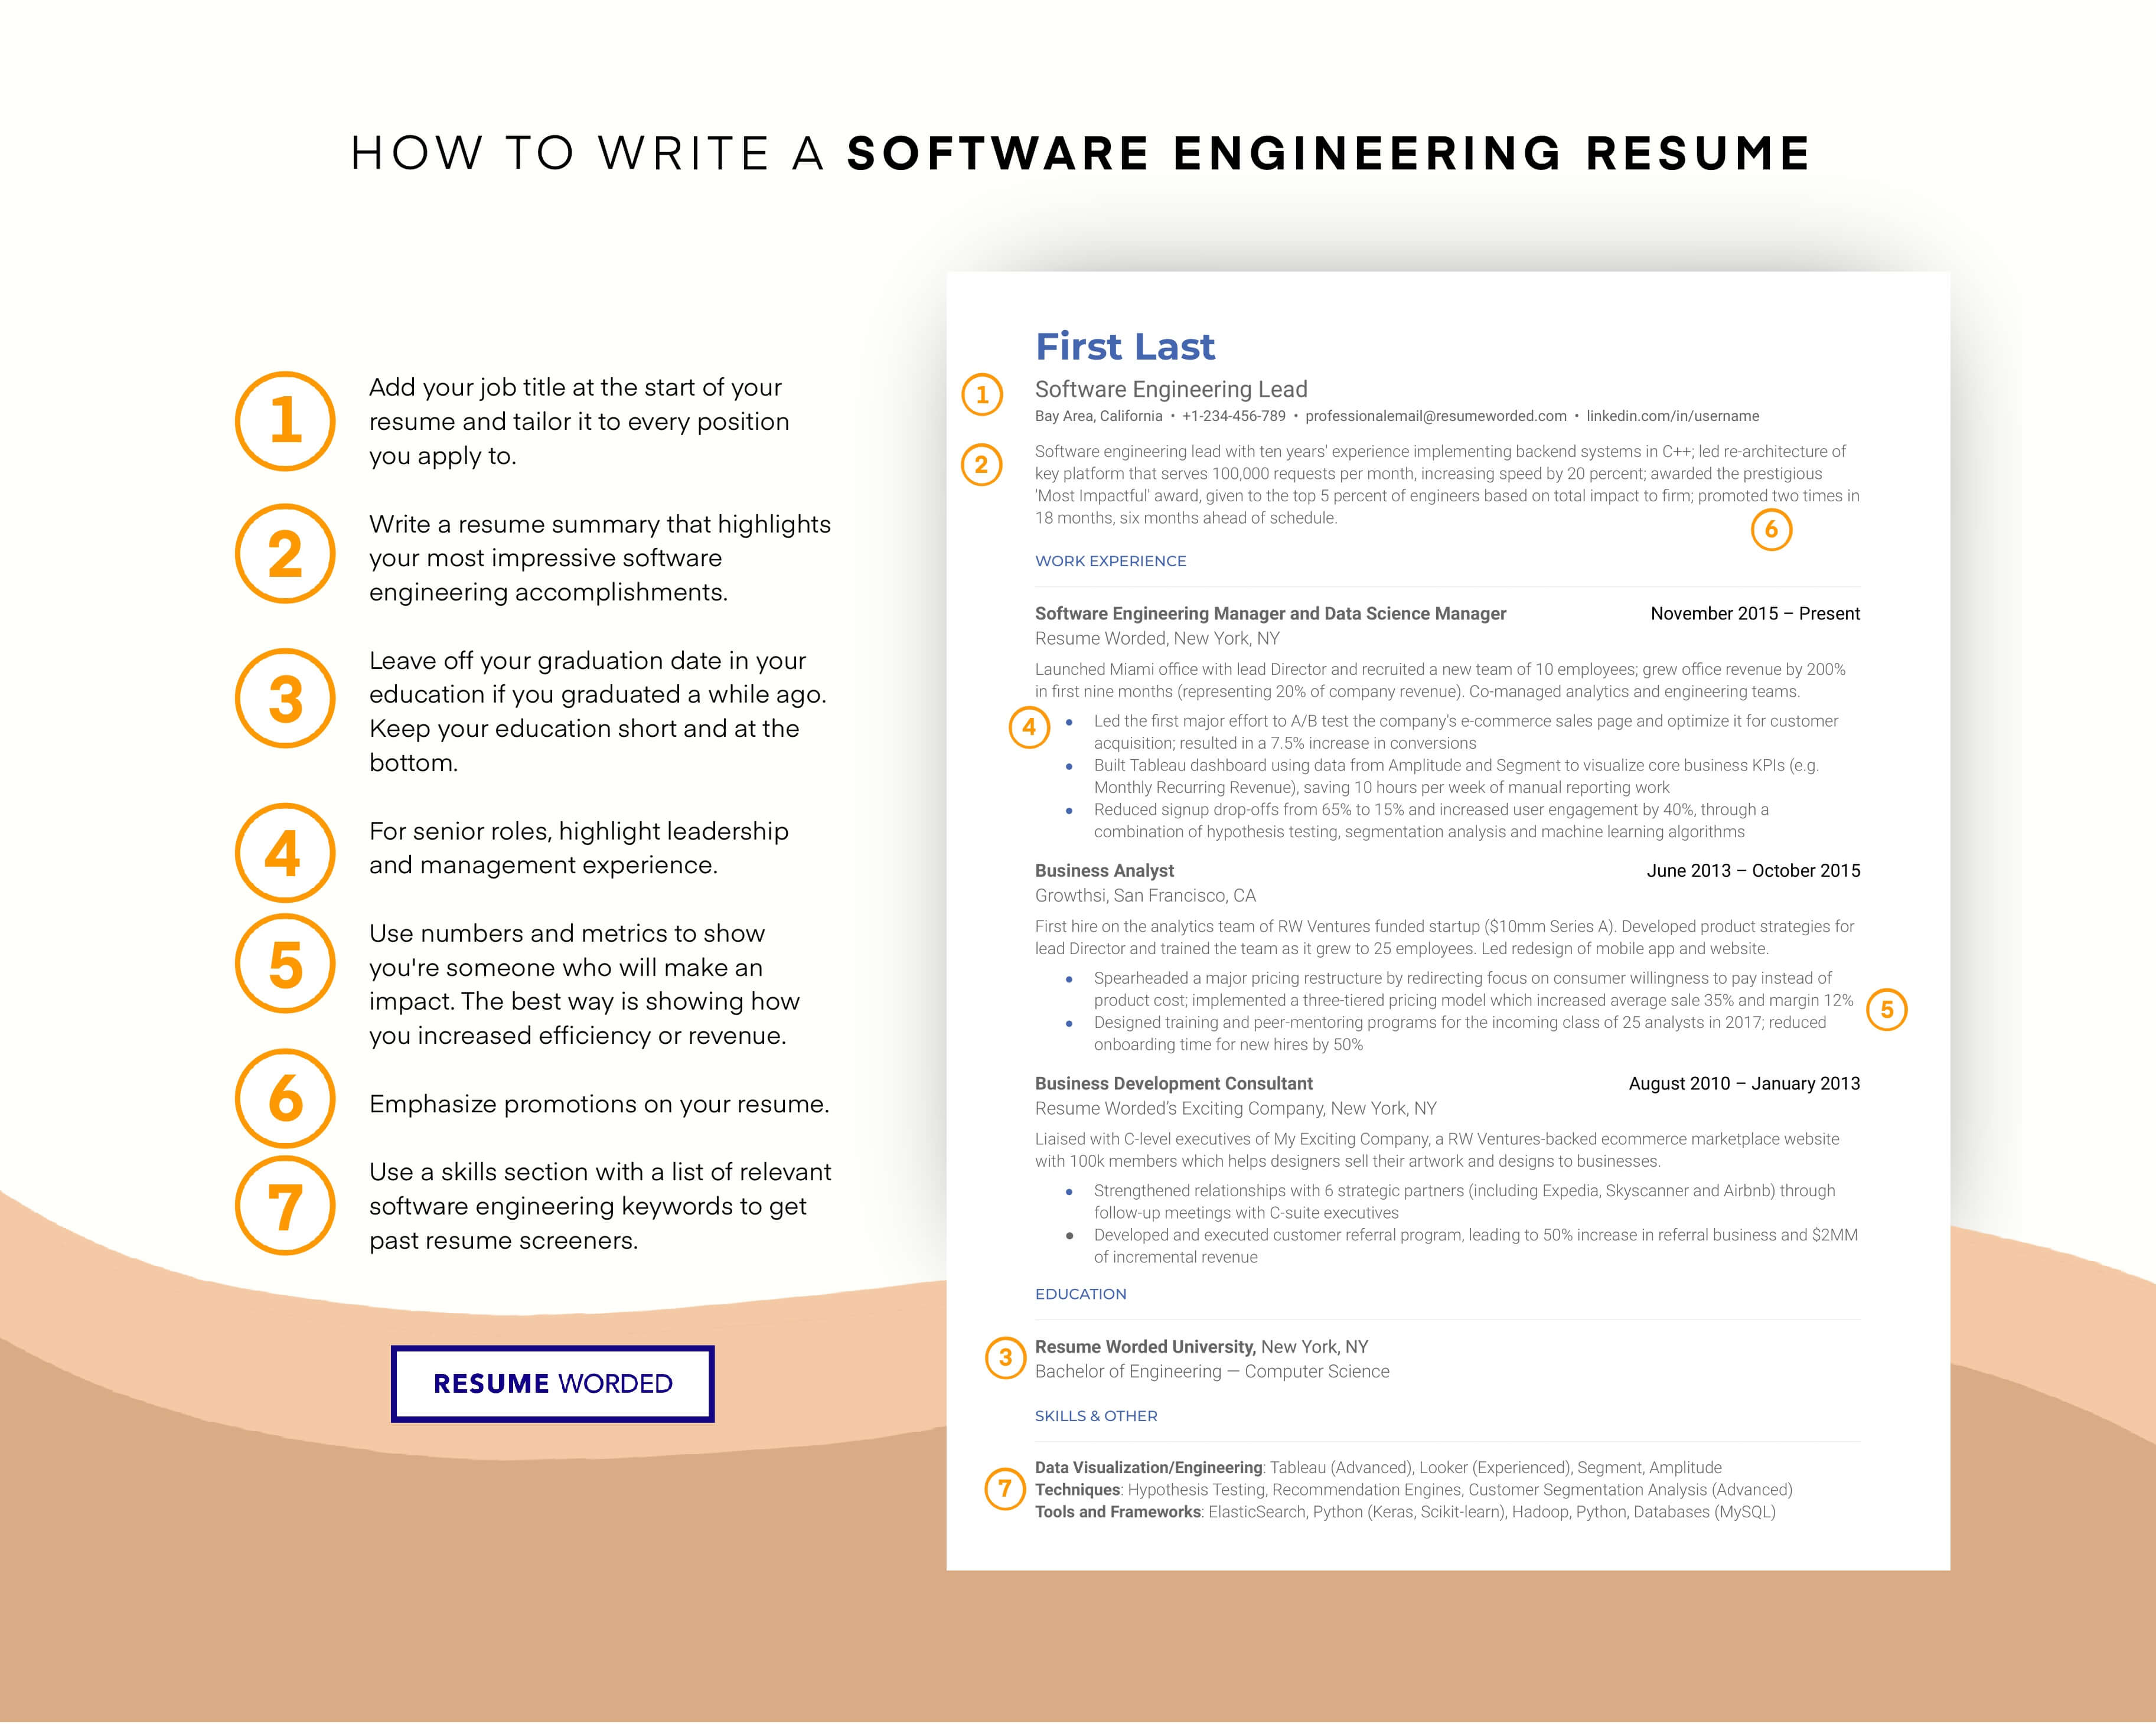 Highlight your use of CRM software on your resume - Technical Demand Planning Manager Resume